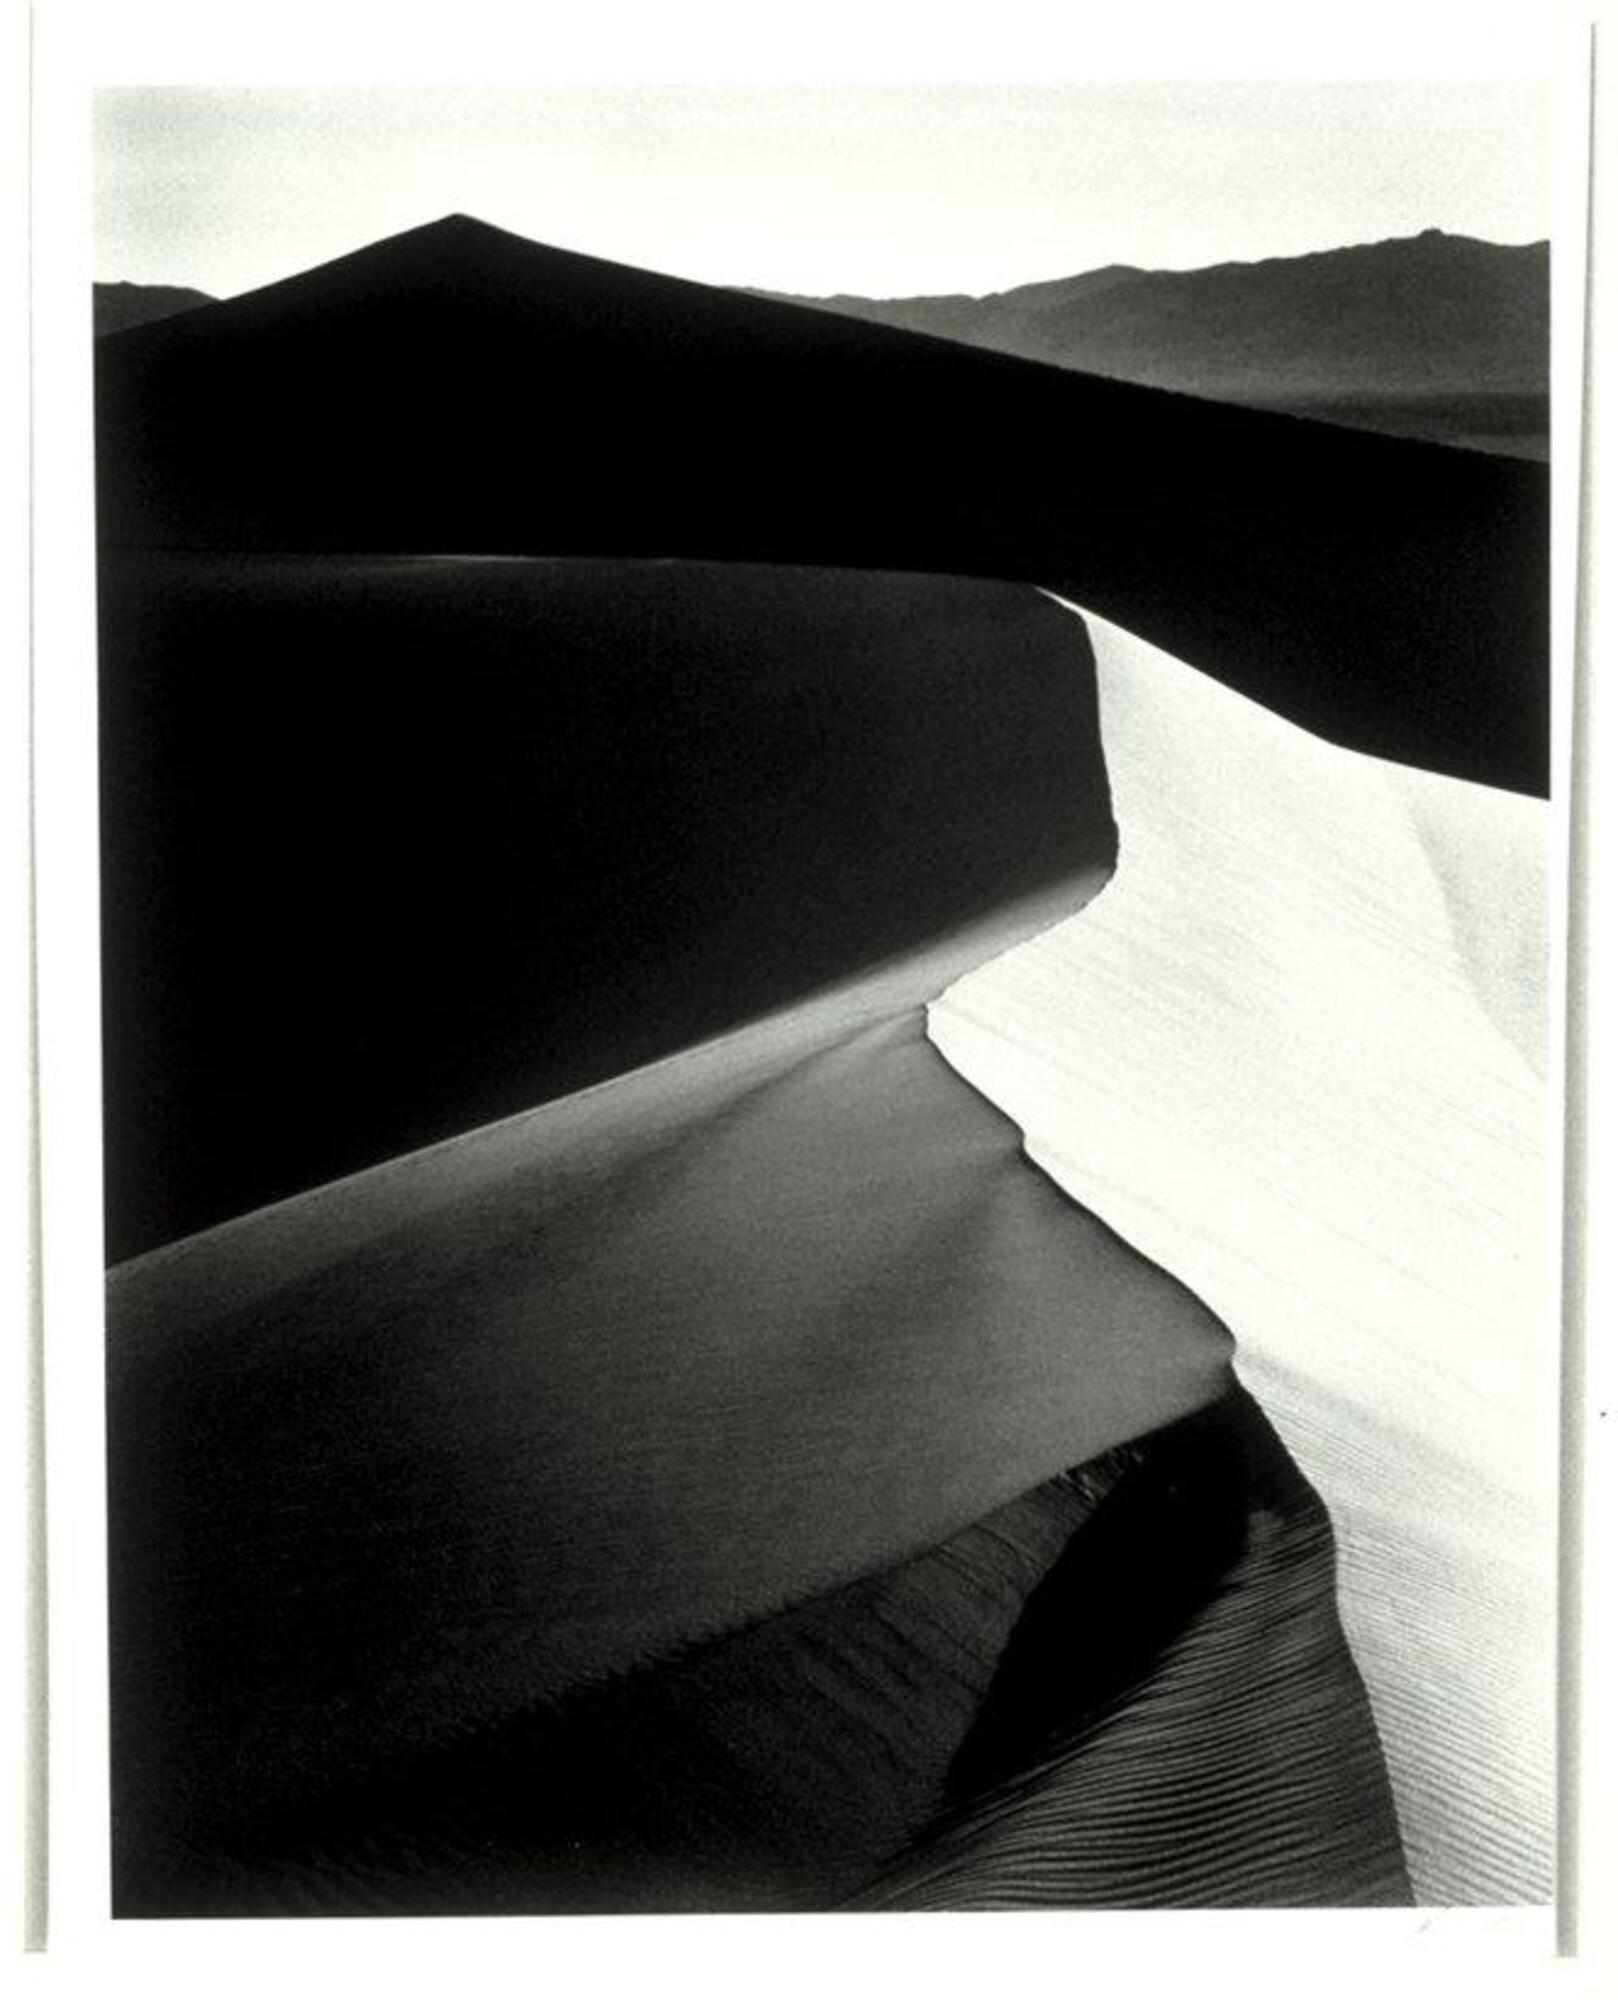 The photograph depicts an expanse of sand dunes in the morning light.